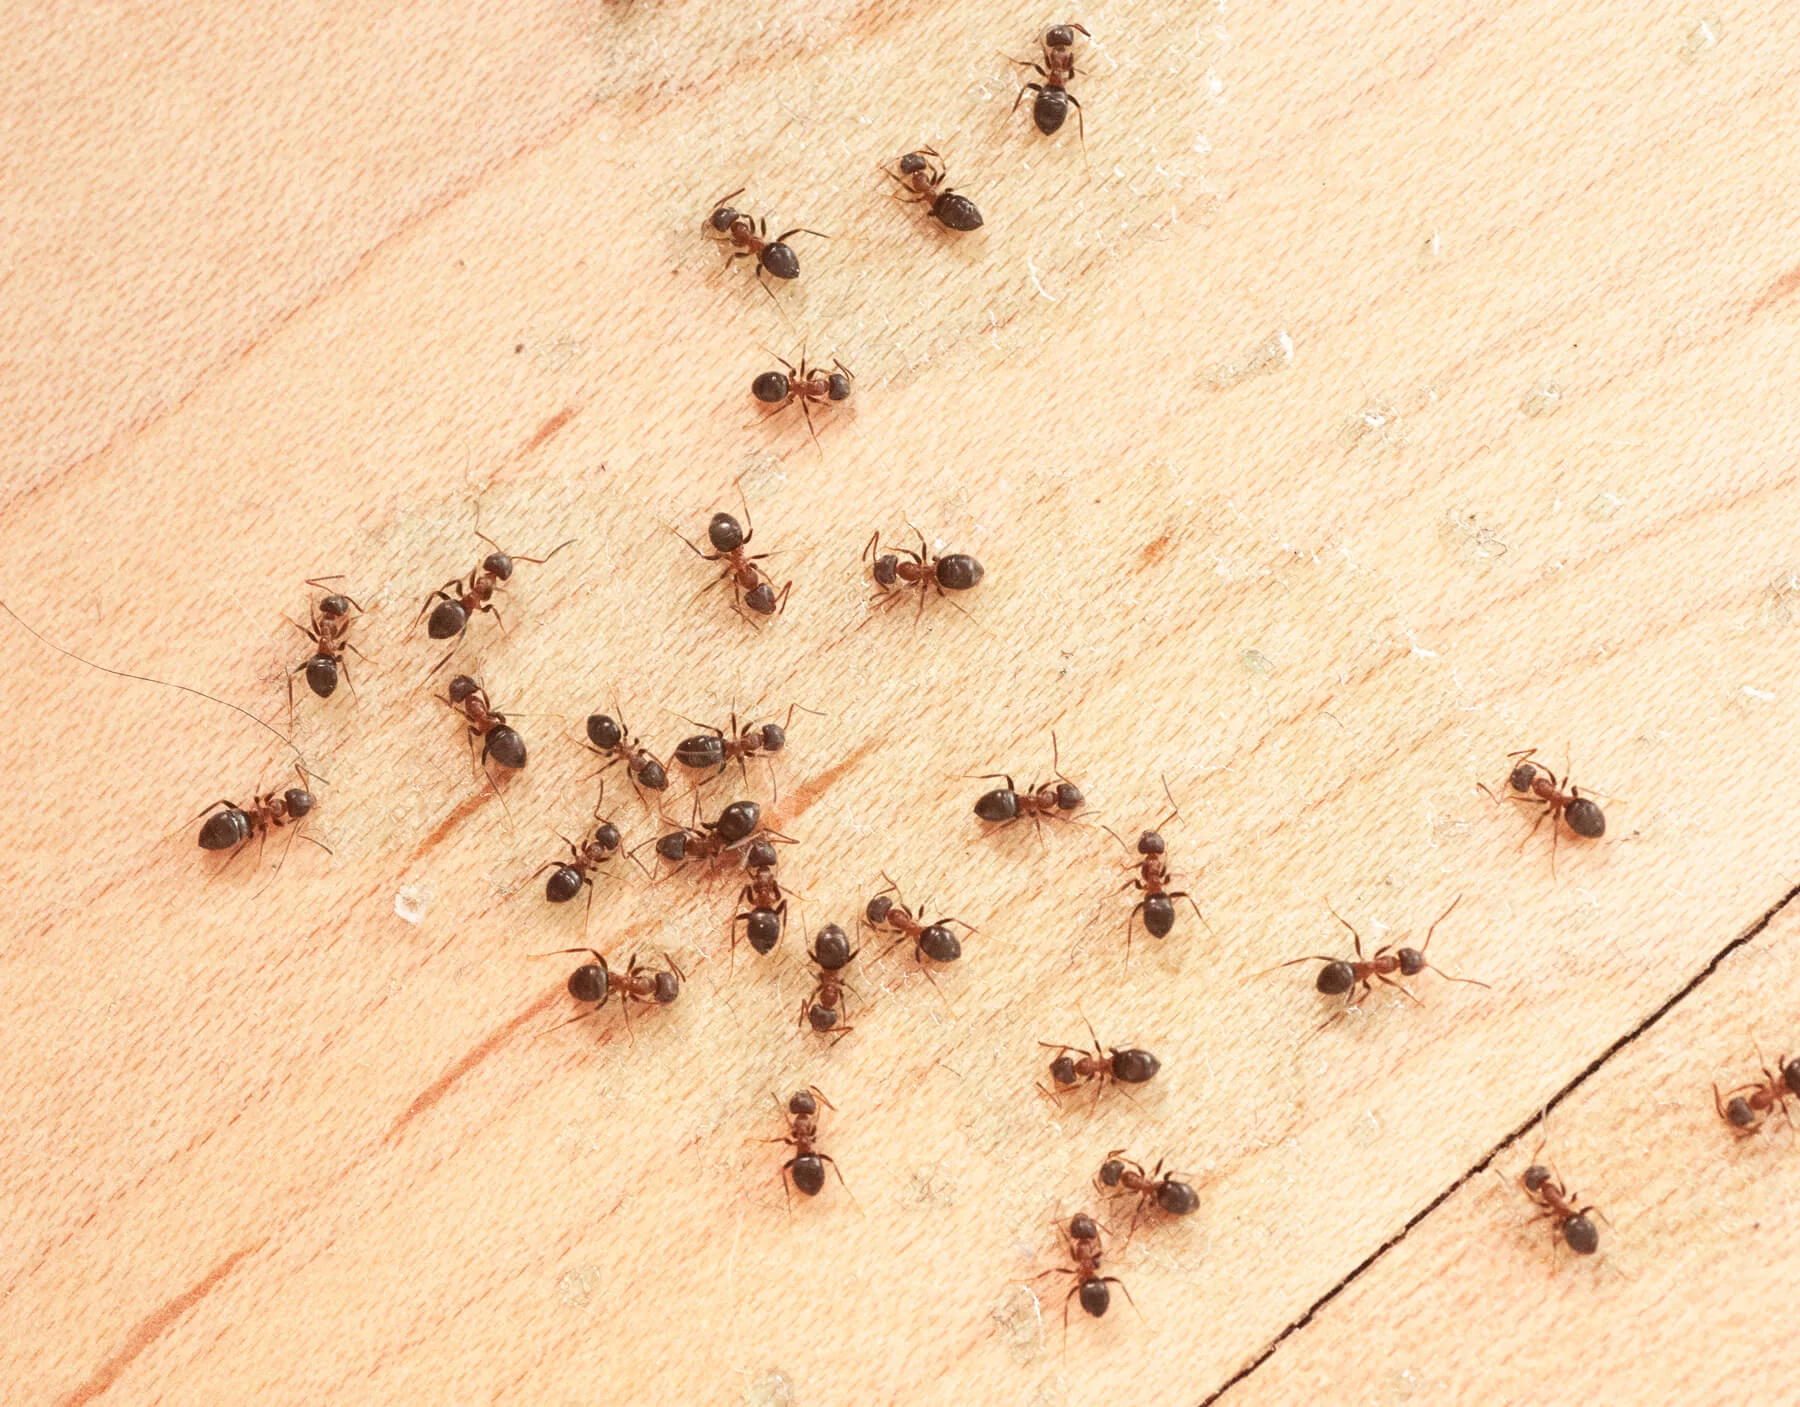 Ants In Southern California Should You